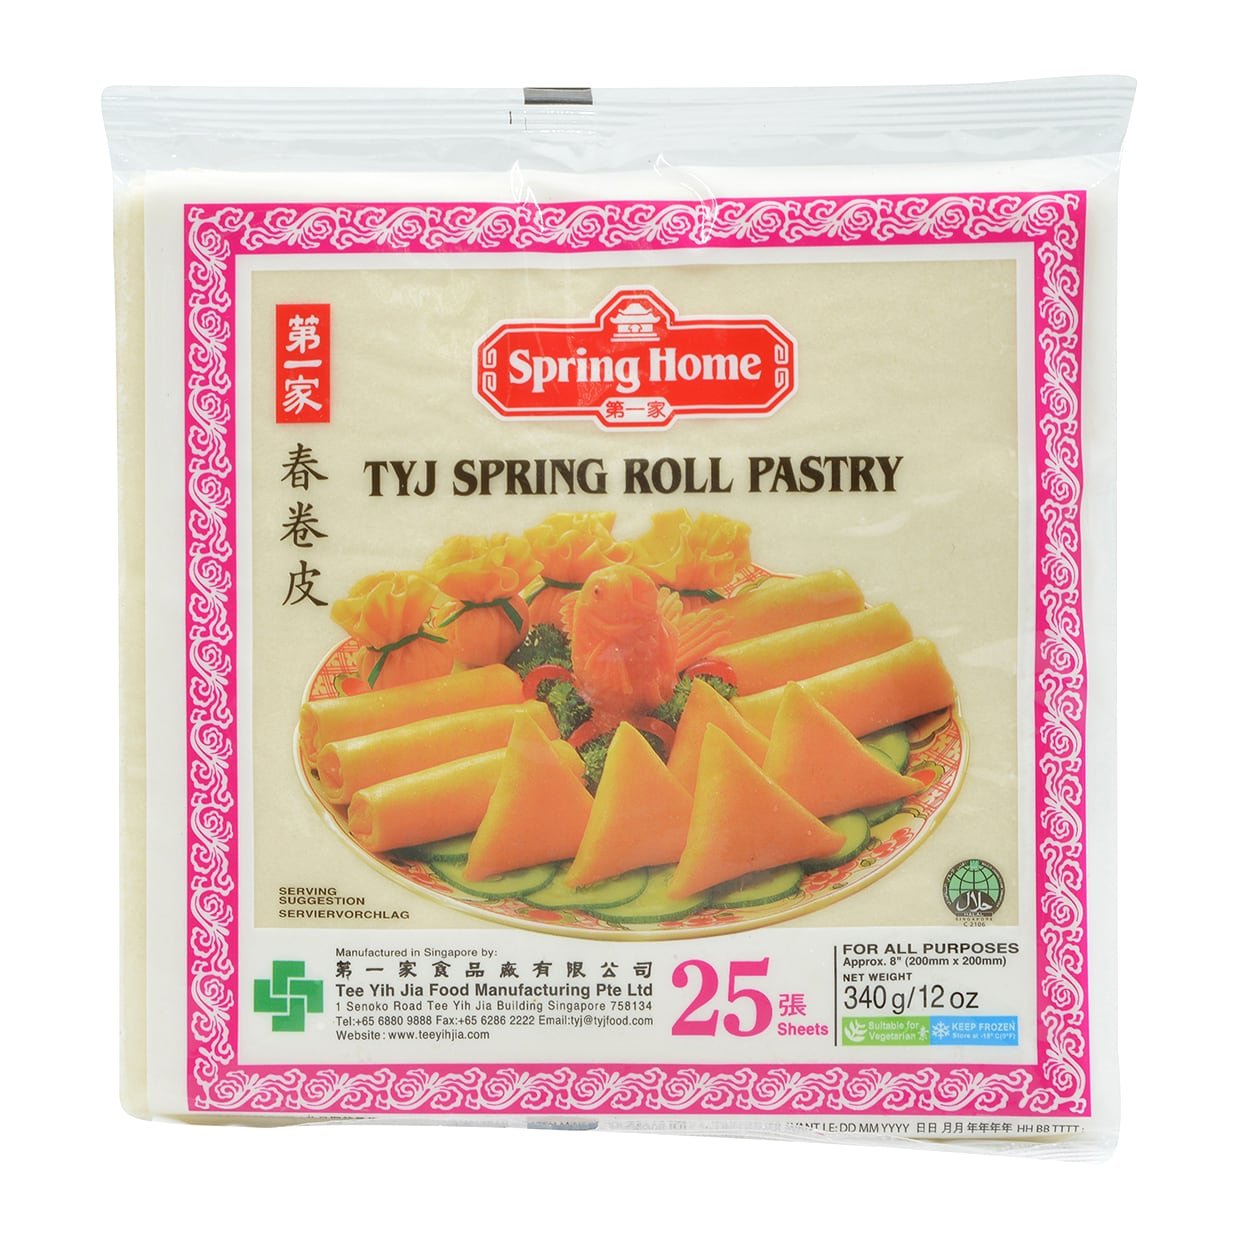 Spring Home, TYJ Spring Roll Pastry, 25